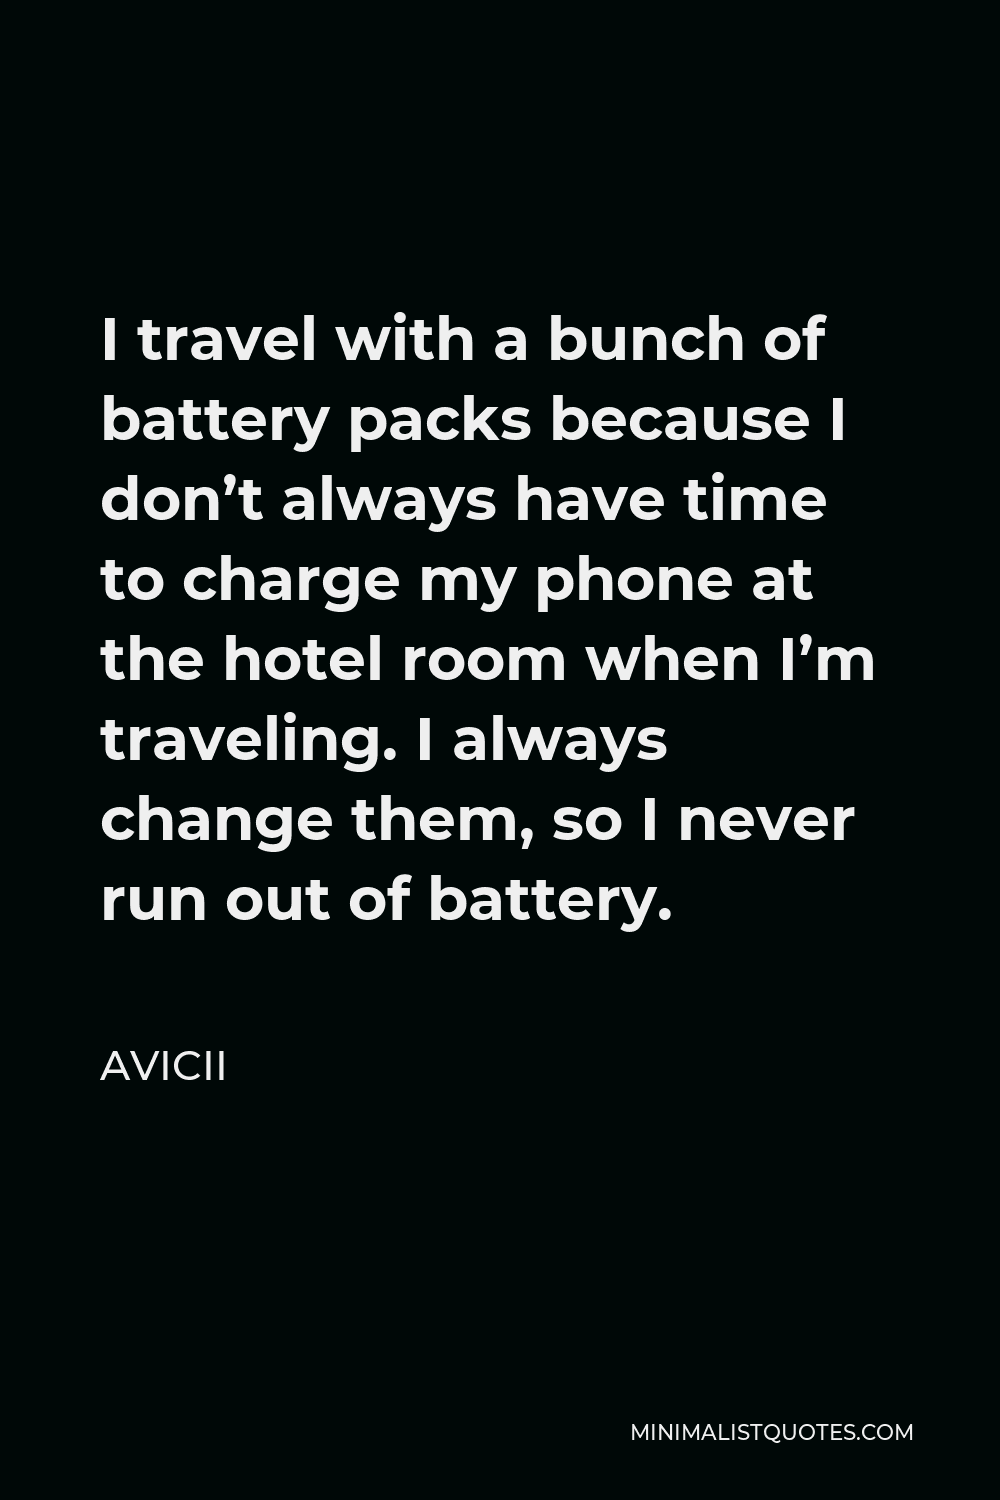 Avicii Quote - I travel with a bunch of battery packs because I don’t always have time to charge my phone at the hotel room when I’m traveling. I always change them, so I never run out of battery.